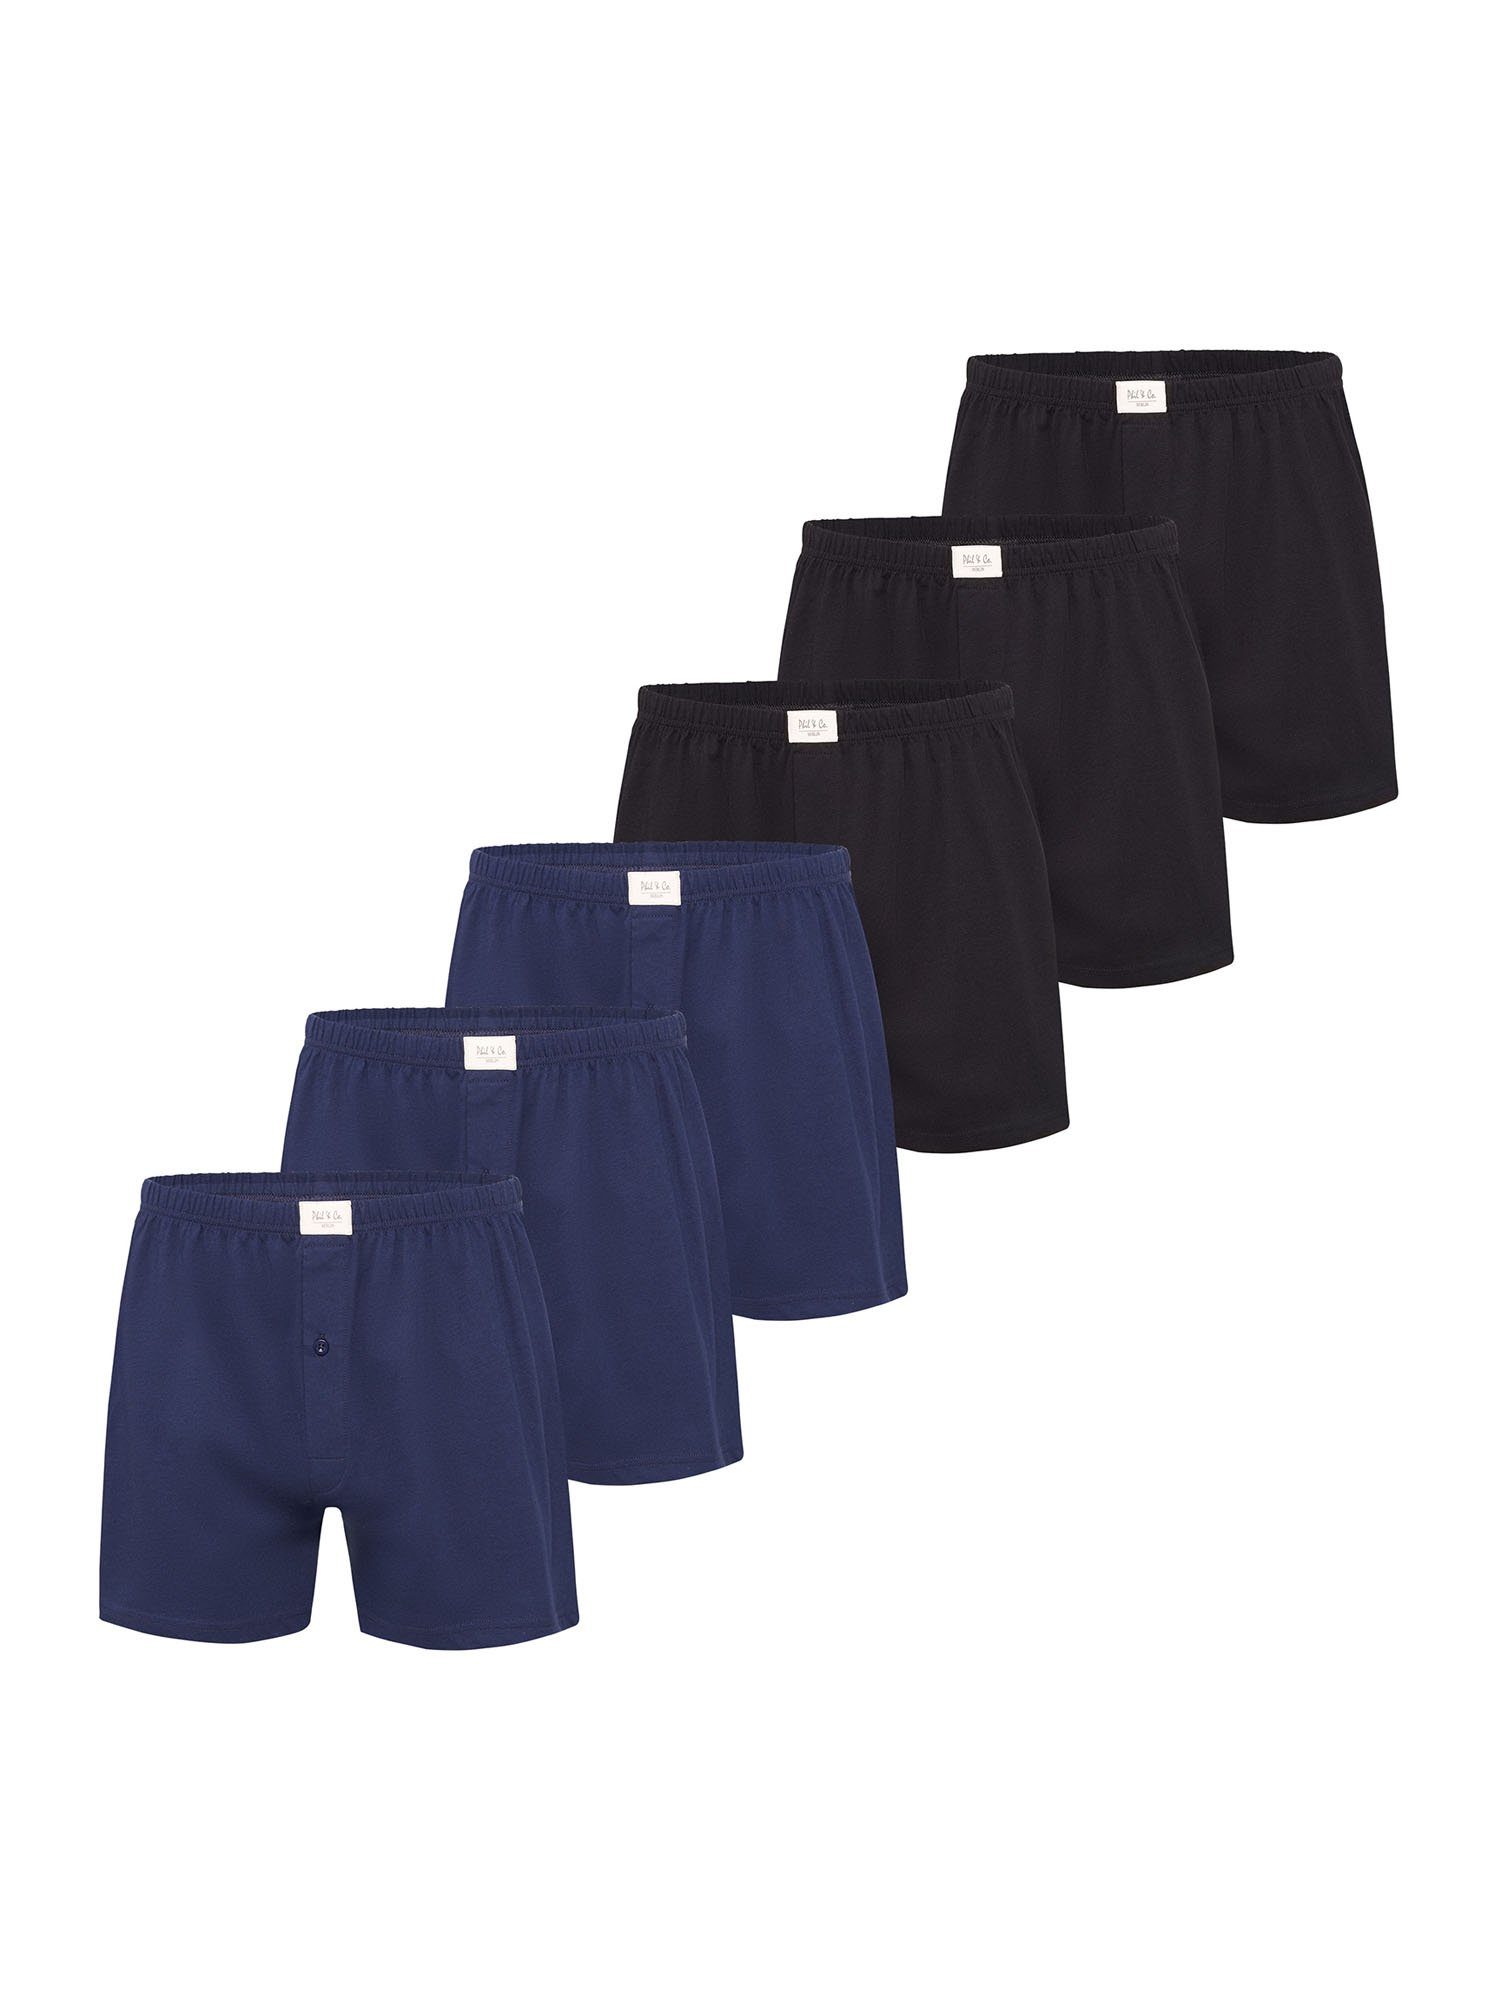 Phil & Co. Boxer Jersey Loose Fit (6-St) black-navy